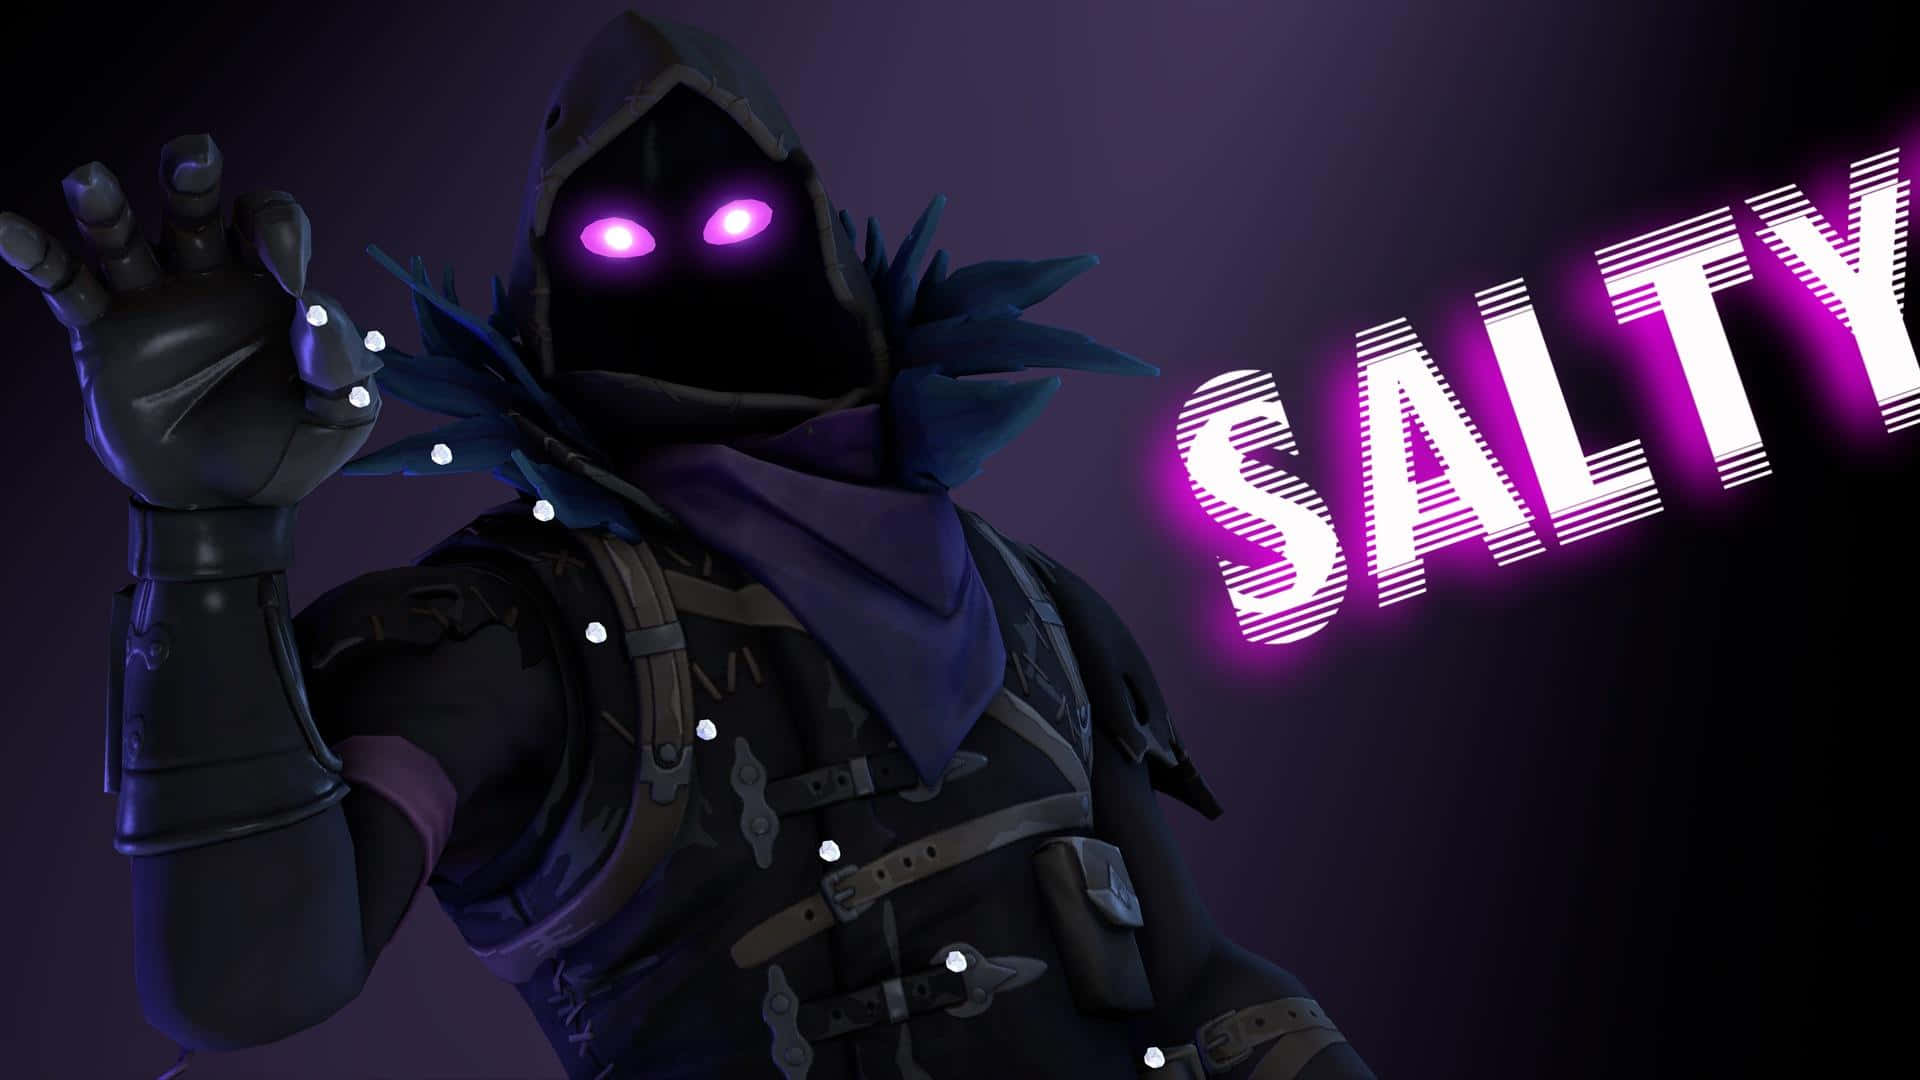 Come and fly with Raven, the mysterious bird-like Fortnite character! Wallpaper